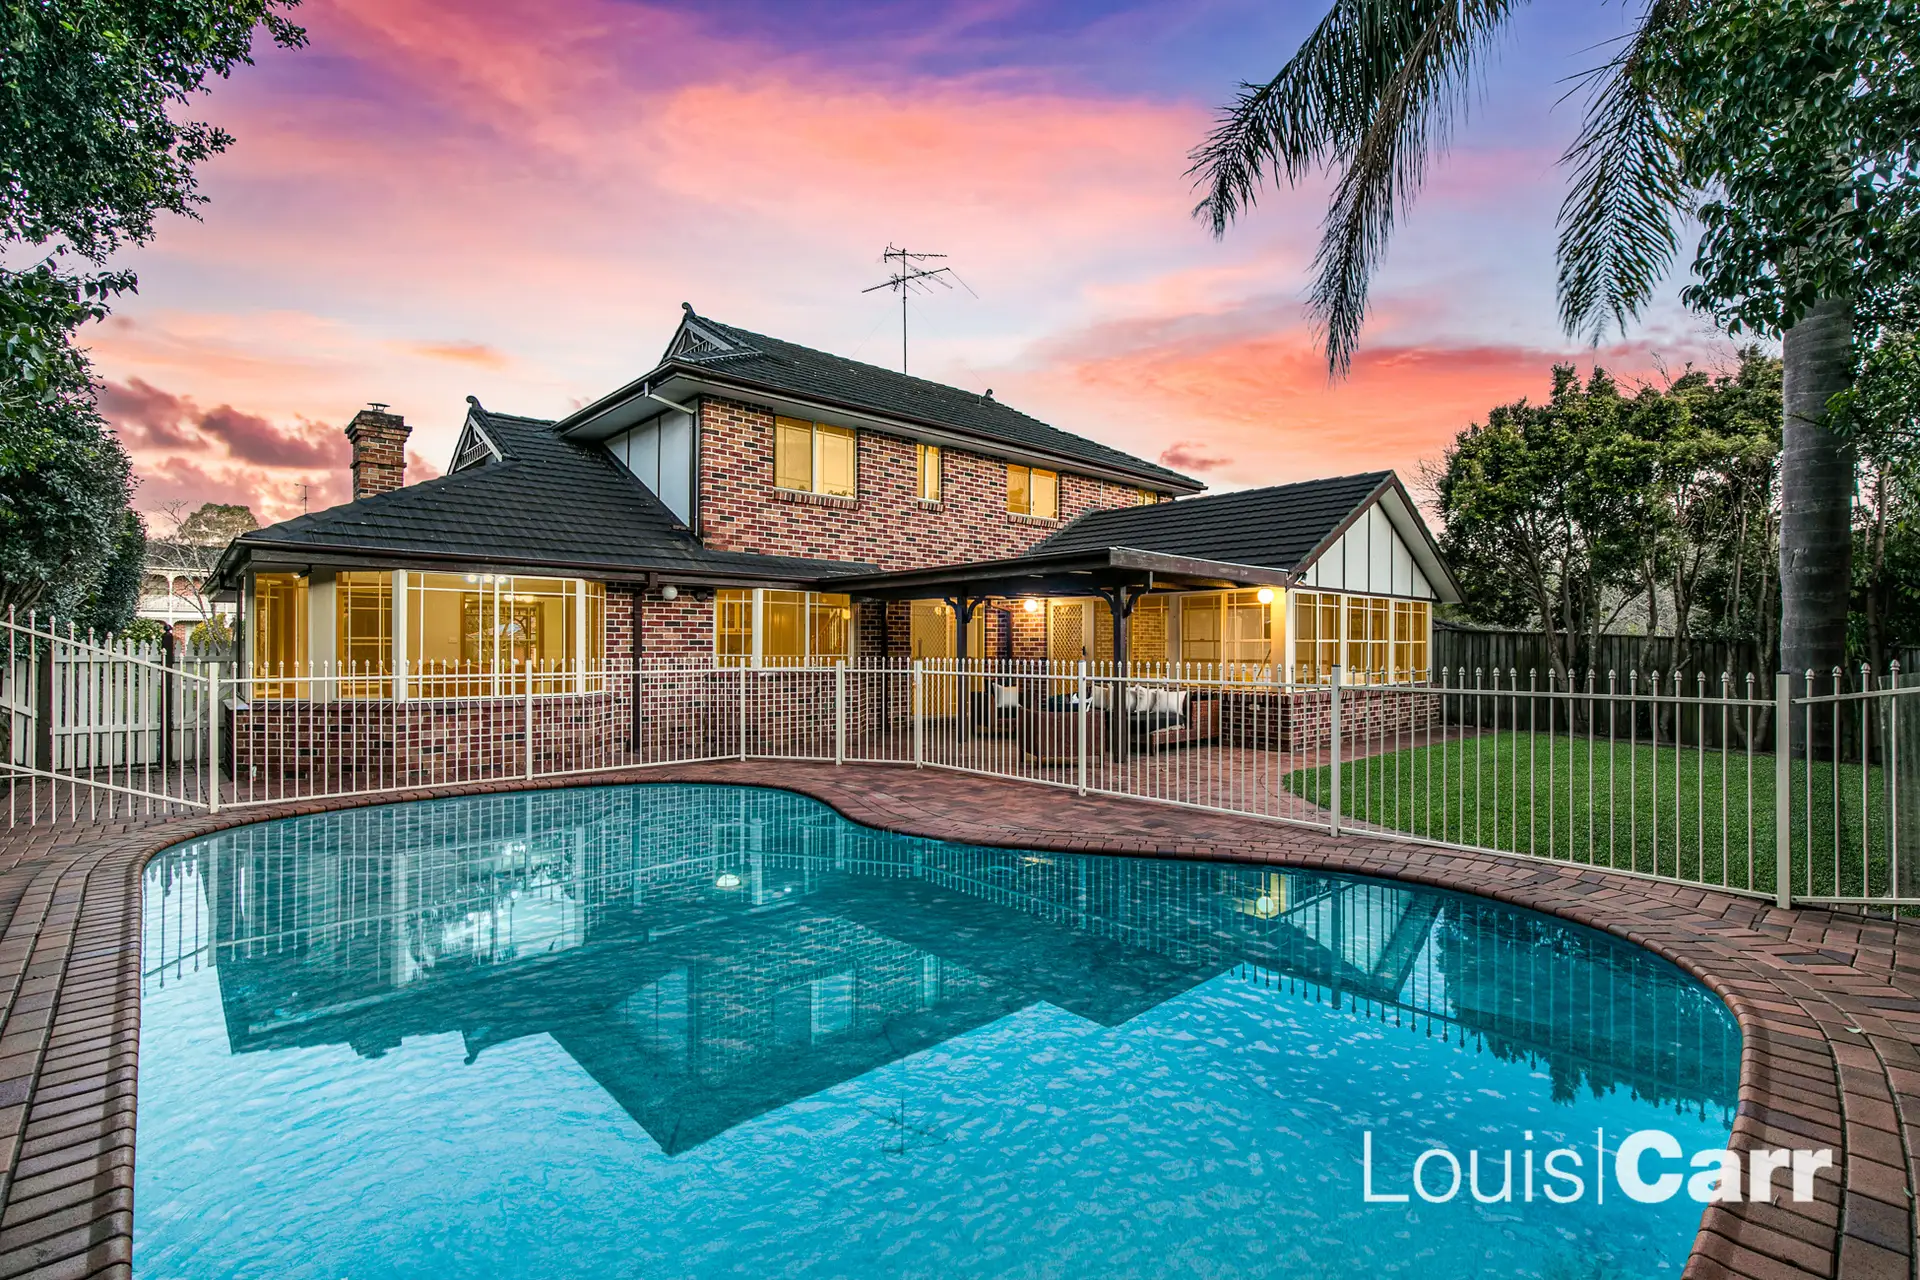 Photo #5: 3 Bowen Close, Cherrybrook - Sold by Louis Carr Real Estate